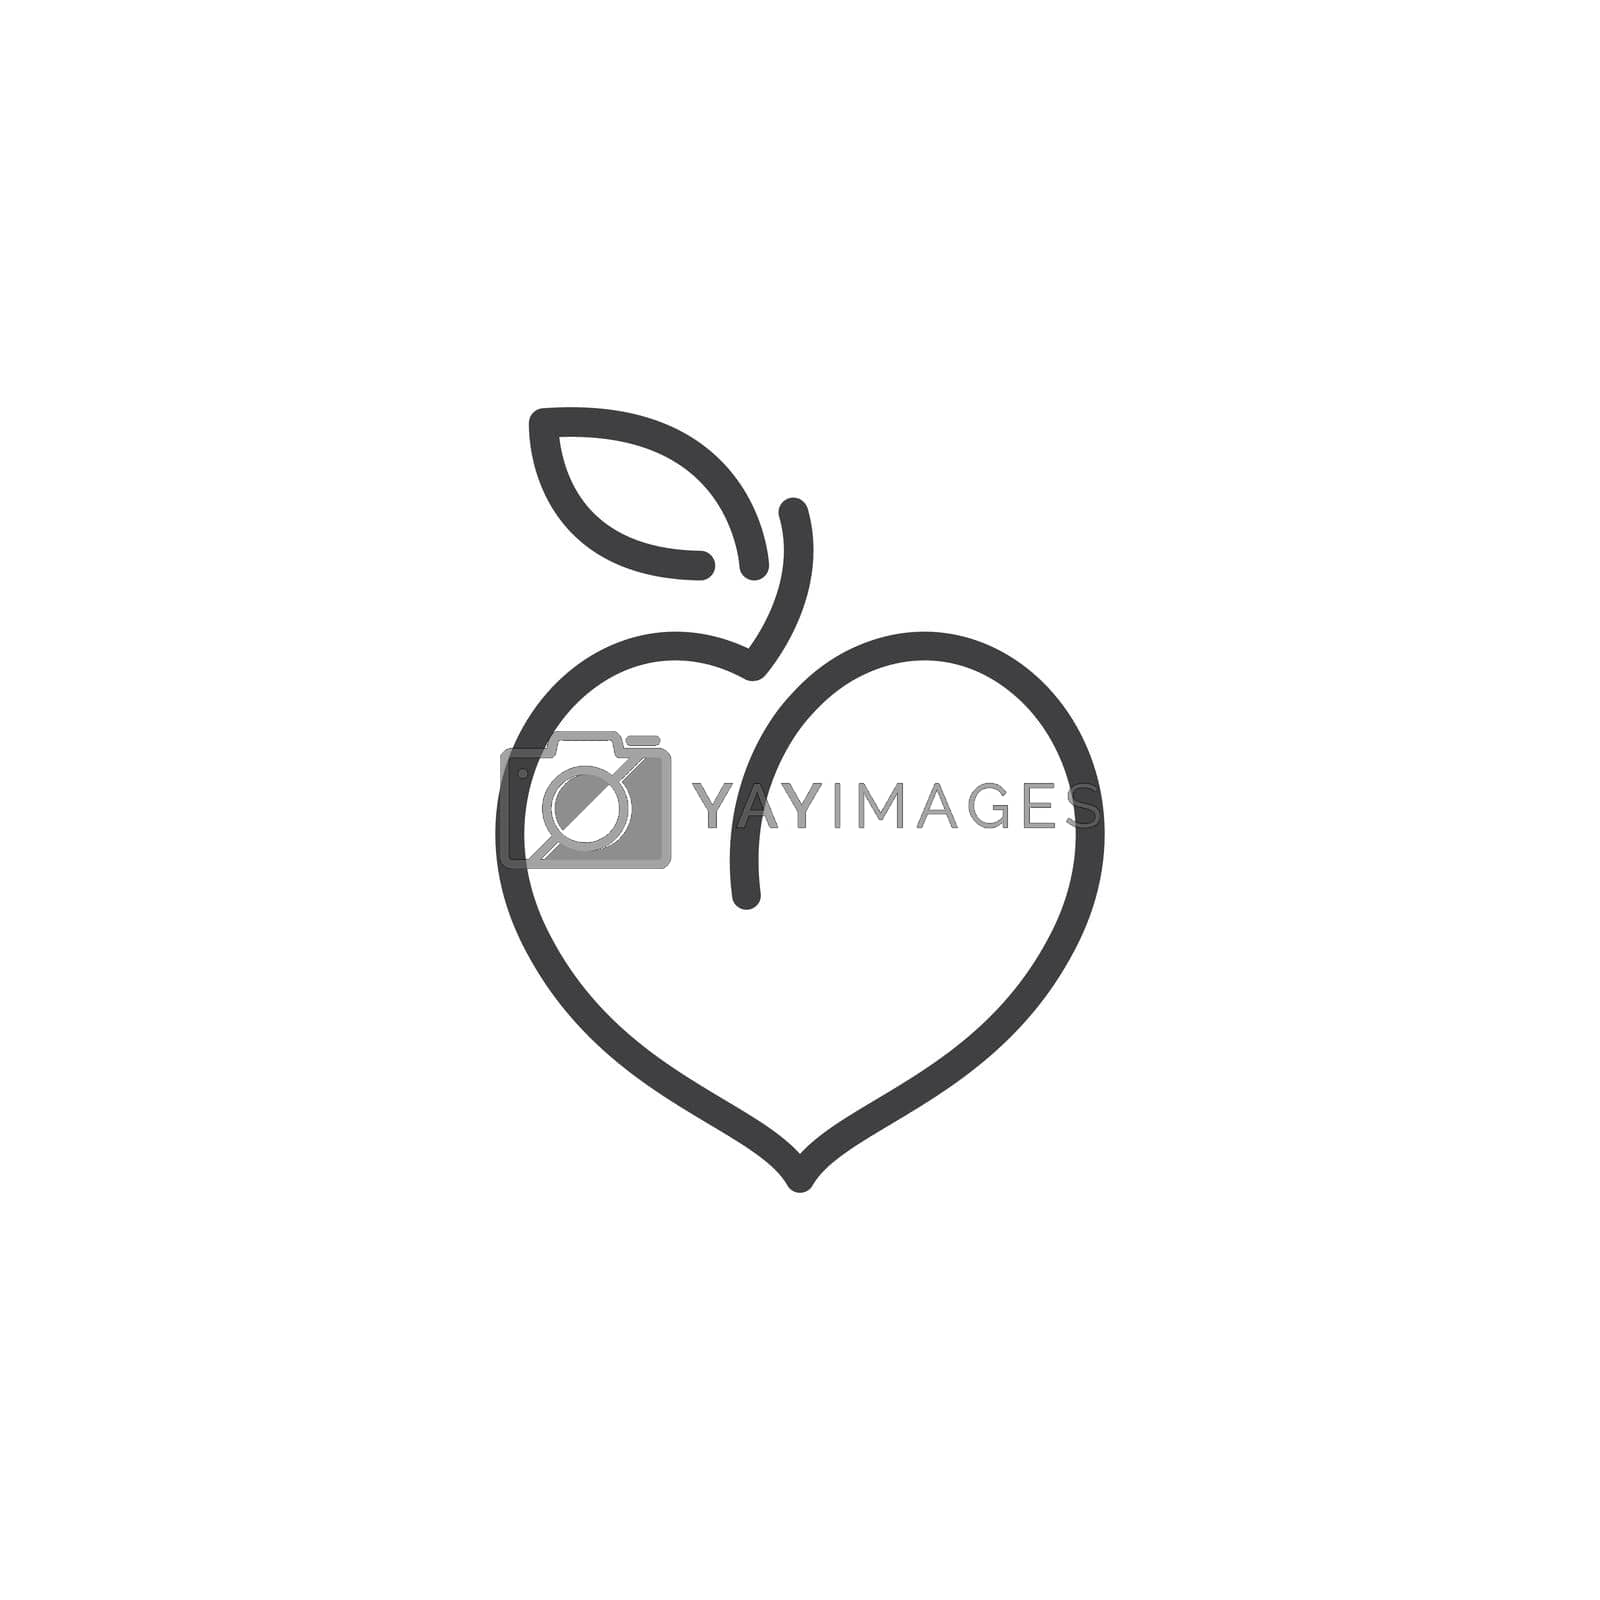 Royalty free image of Peach fruit by awk